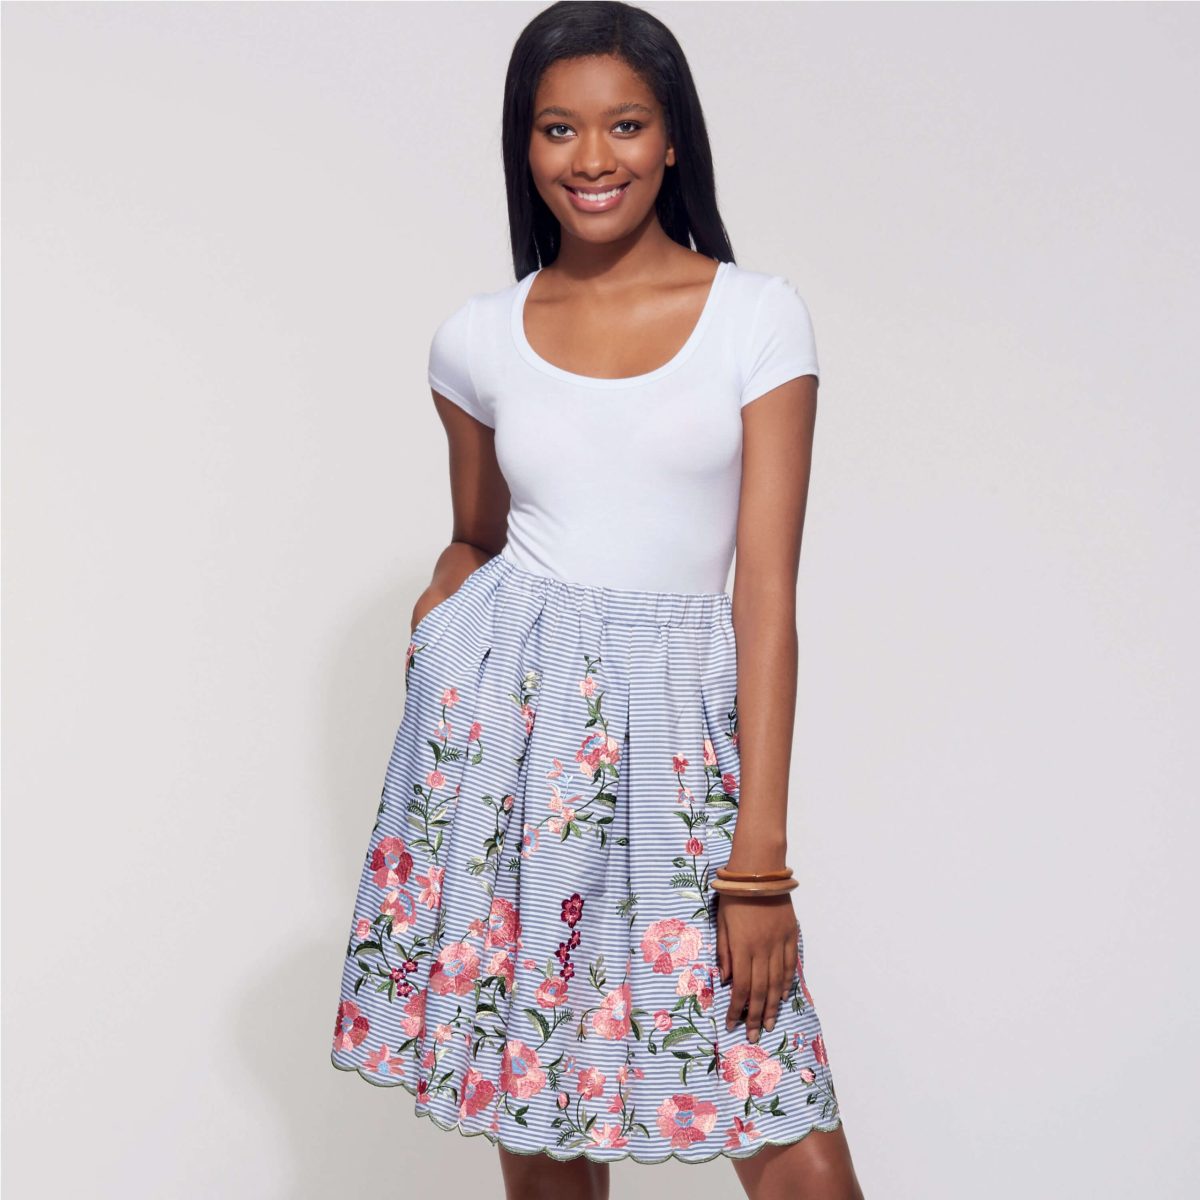 New Look Pattern N6605 Misses' Skirt with Neck Tie